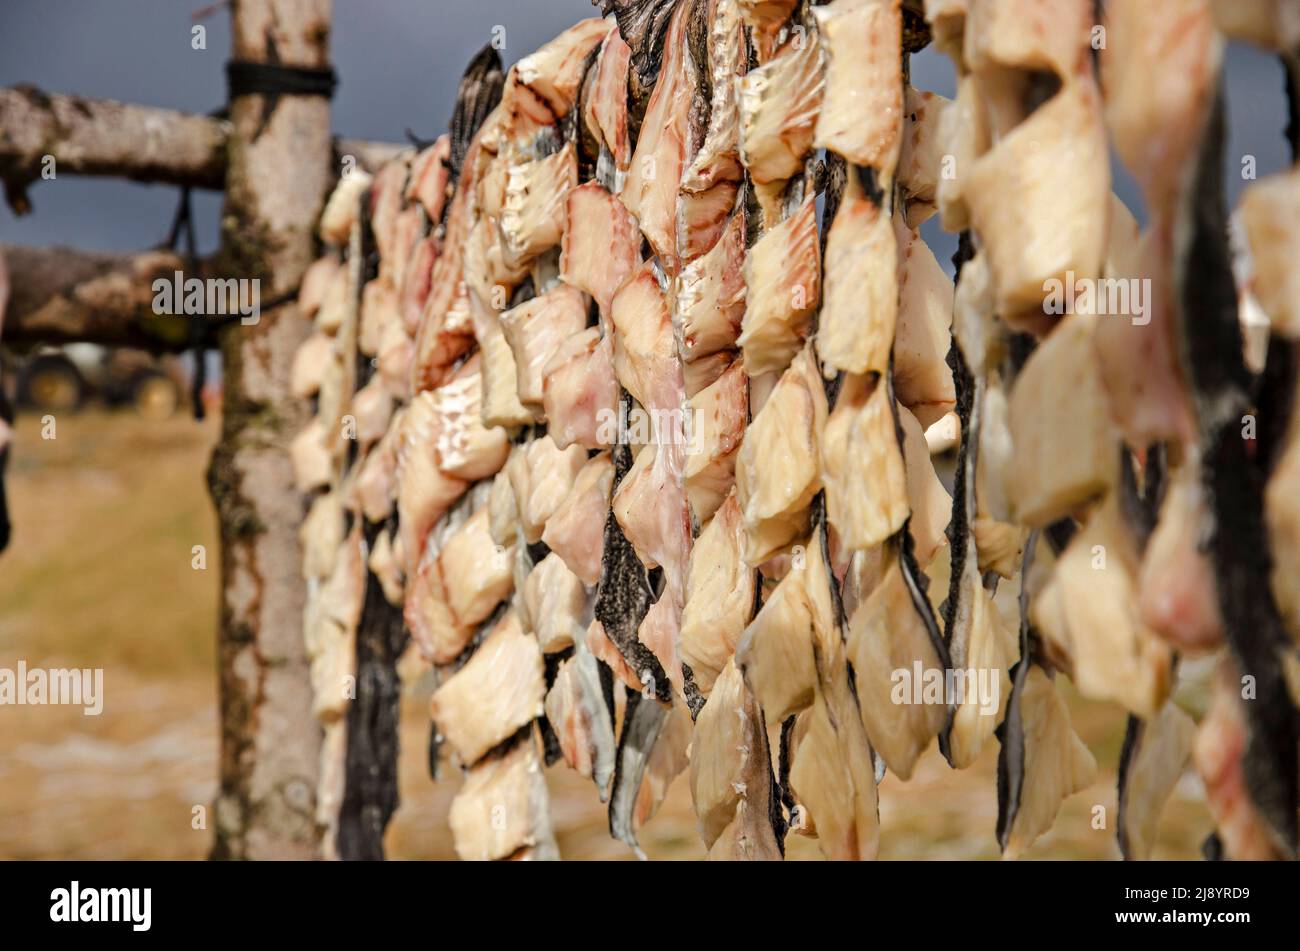 Close-up with depth of field of a row of freshly caught fish, hanging out to dry on a wooden construction in Iceland Stock Photo